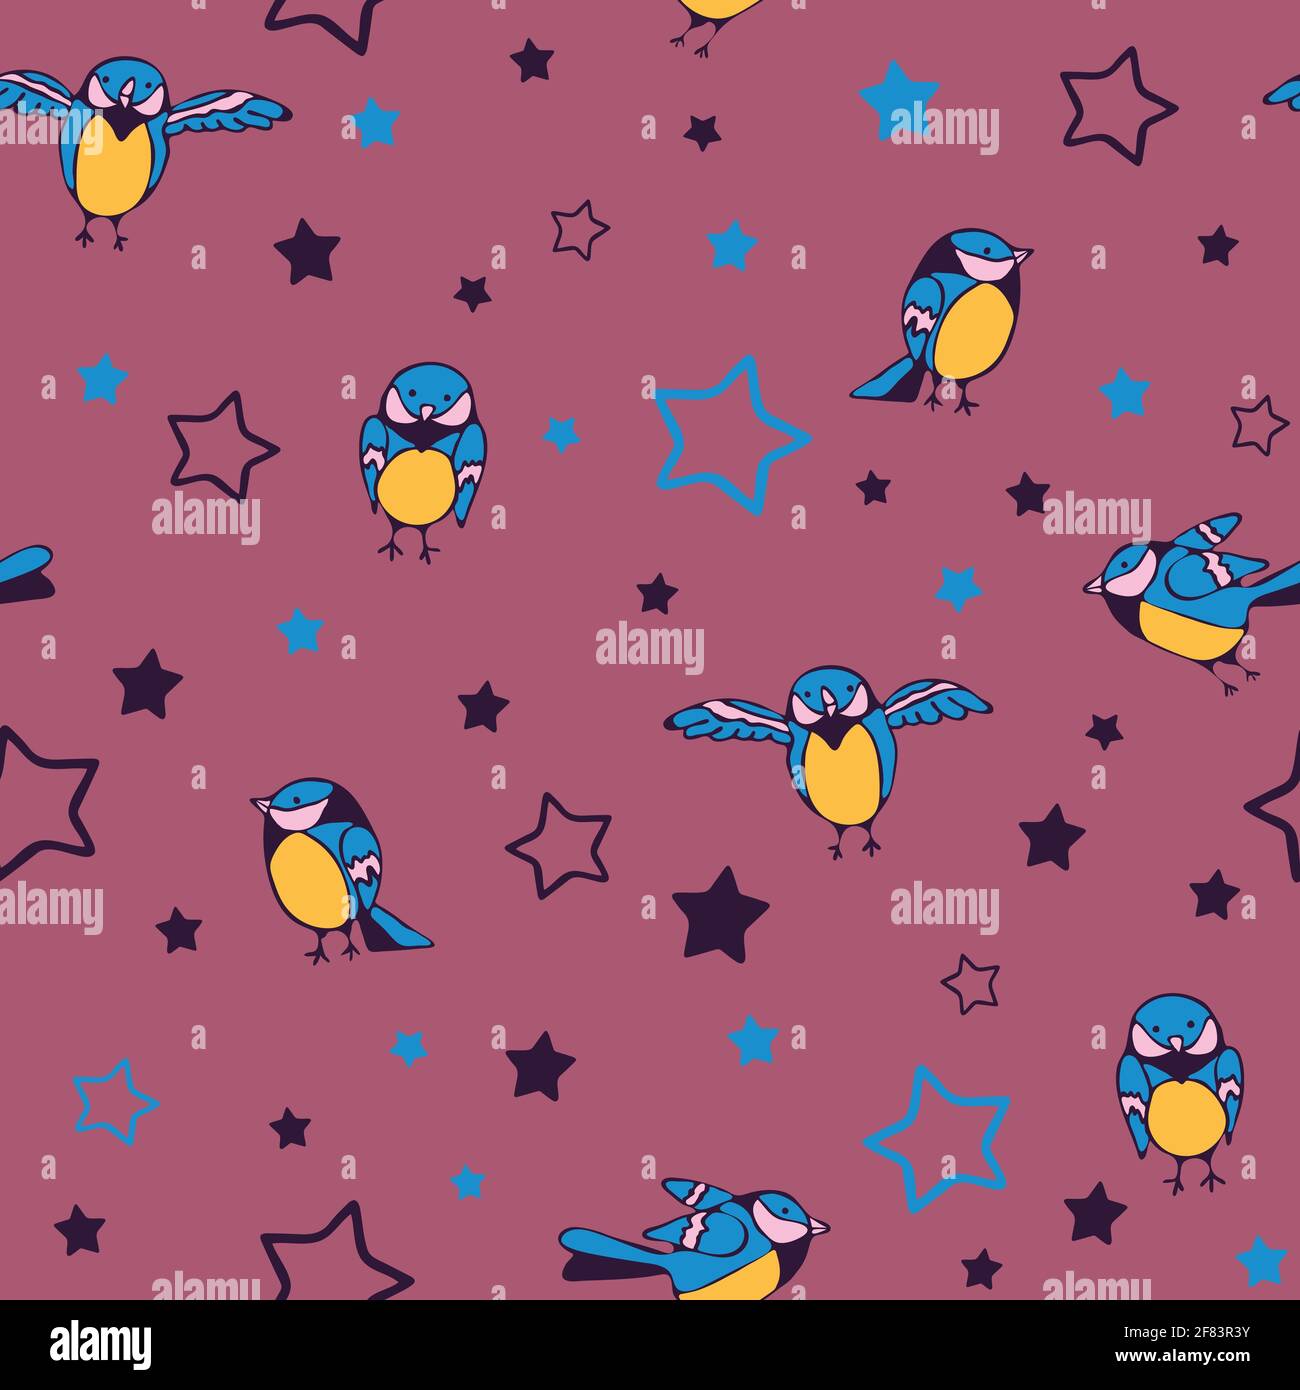 Seamless vector pattern with birds and stars on purple background. Cute sparrow wallpaper design for children. Animal fashion textile. Stock Vector